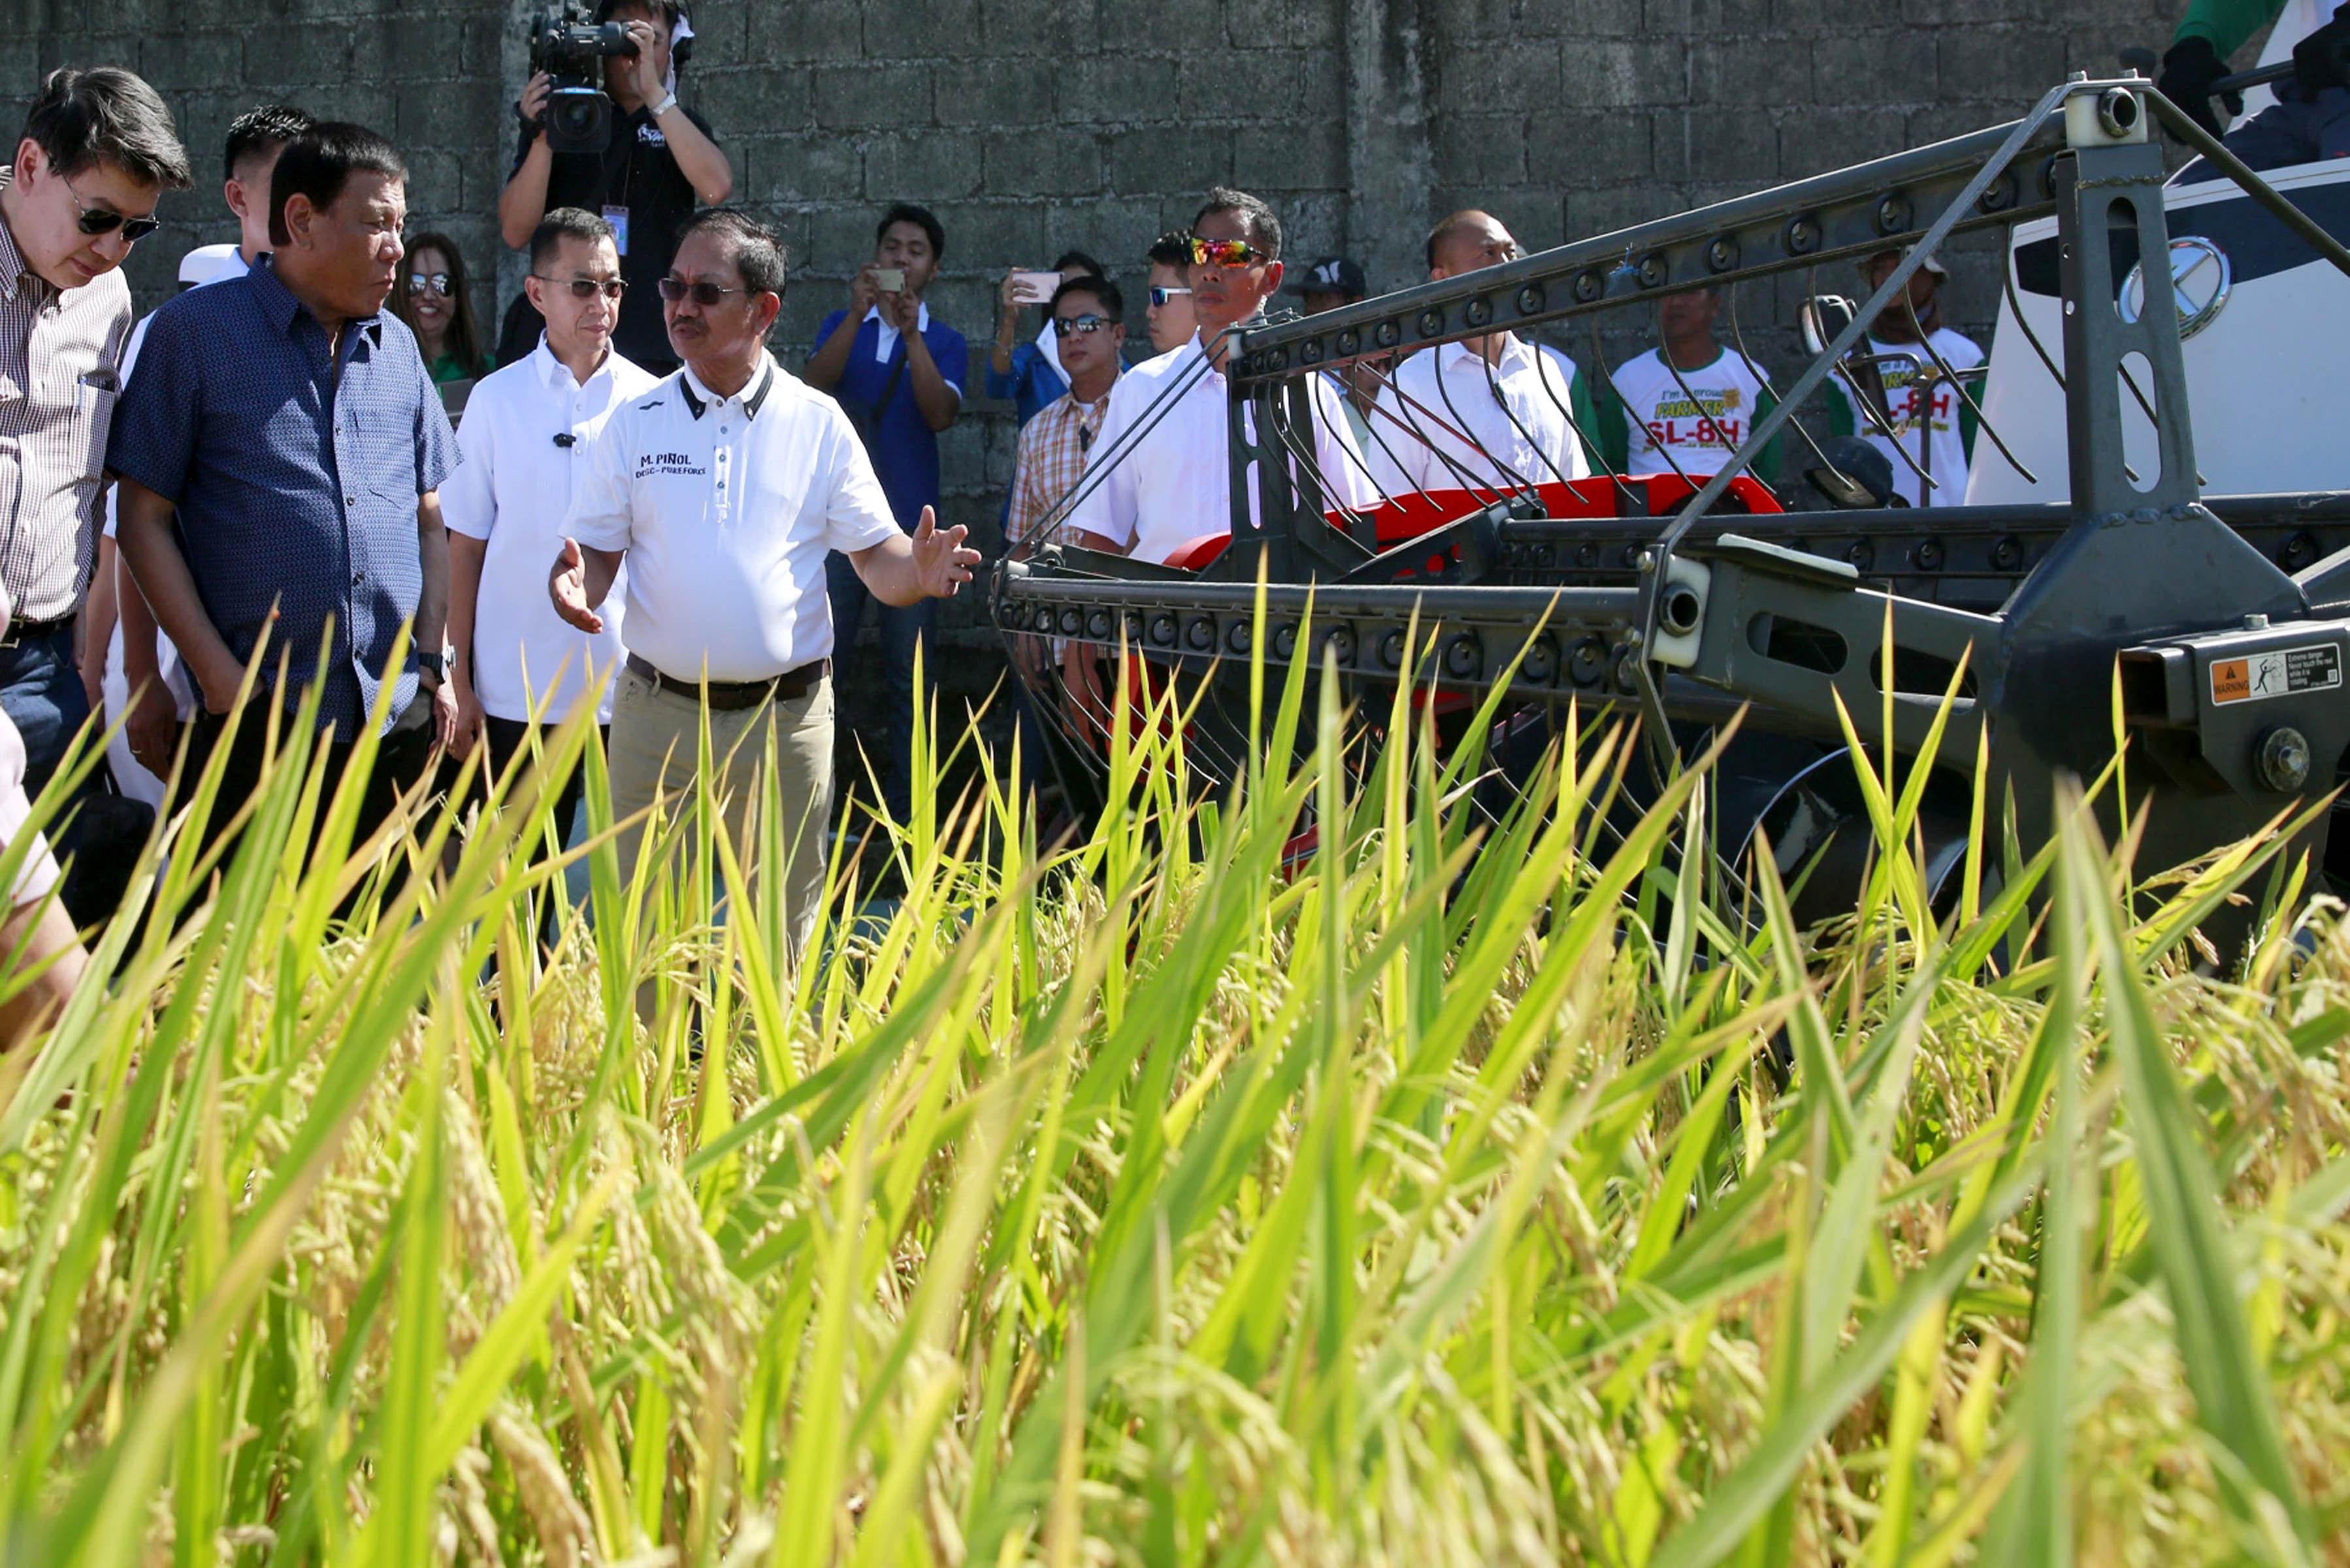 Pres. Duterte looks on as Agriculture Secretary Emmanuel Piñol shows one of the harvesting equipment